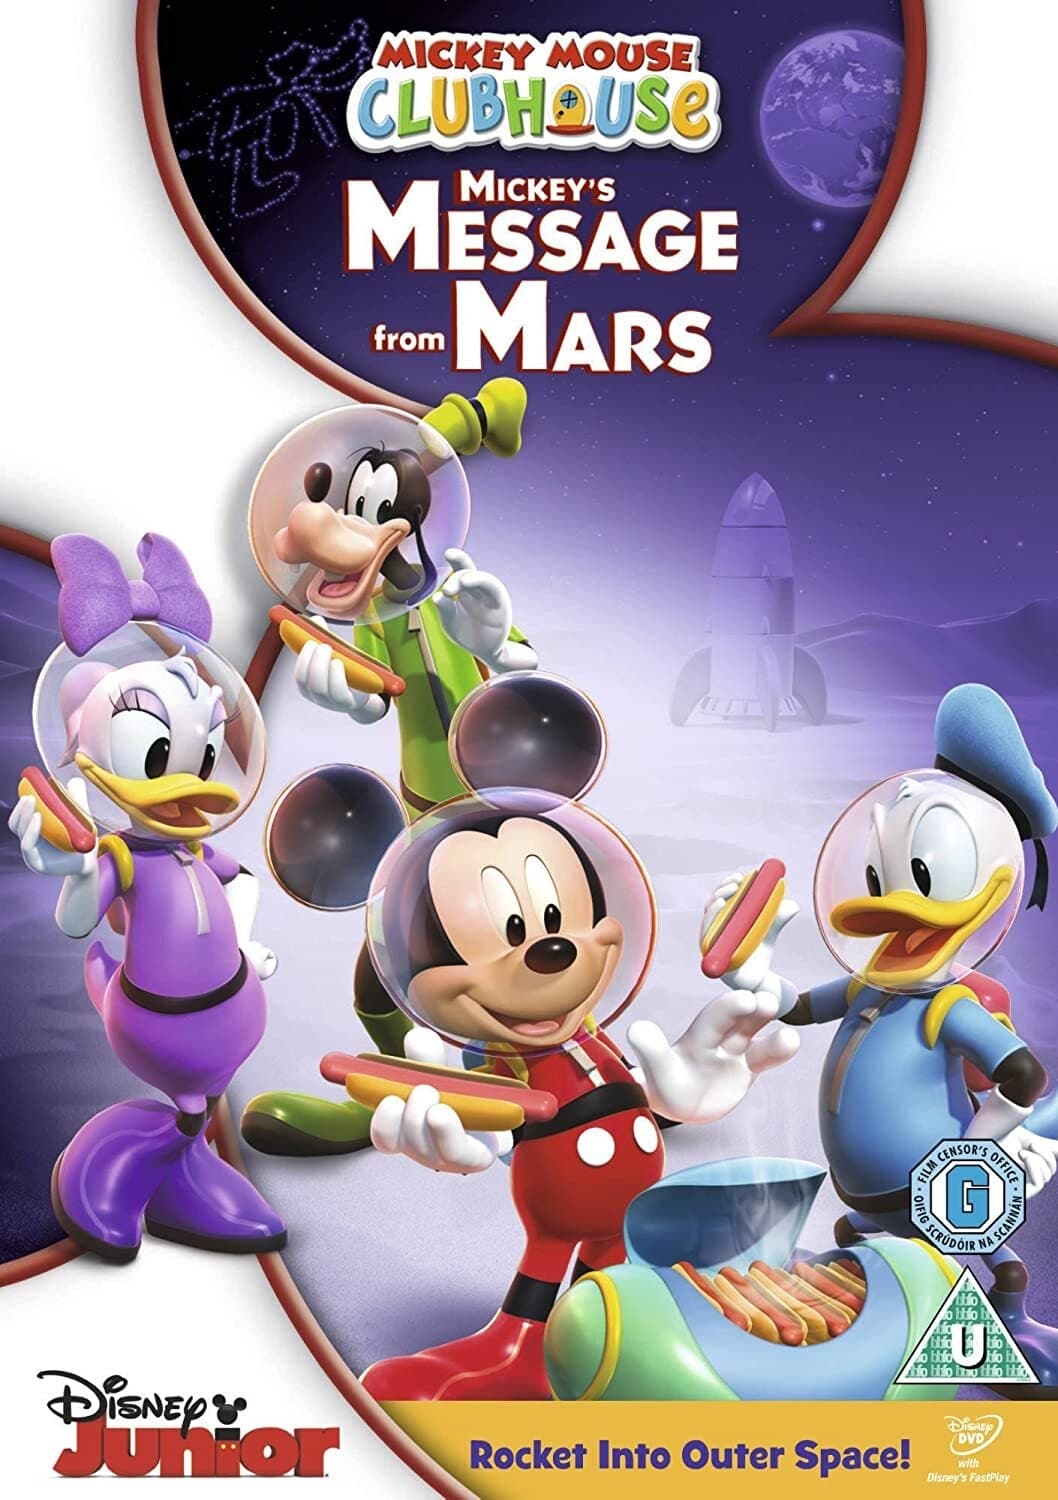 Mickey Mouse Clubhouse: Mickey's Message From Mars